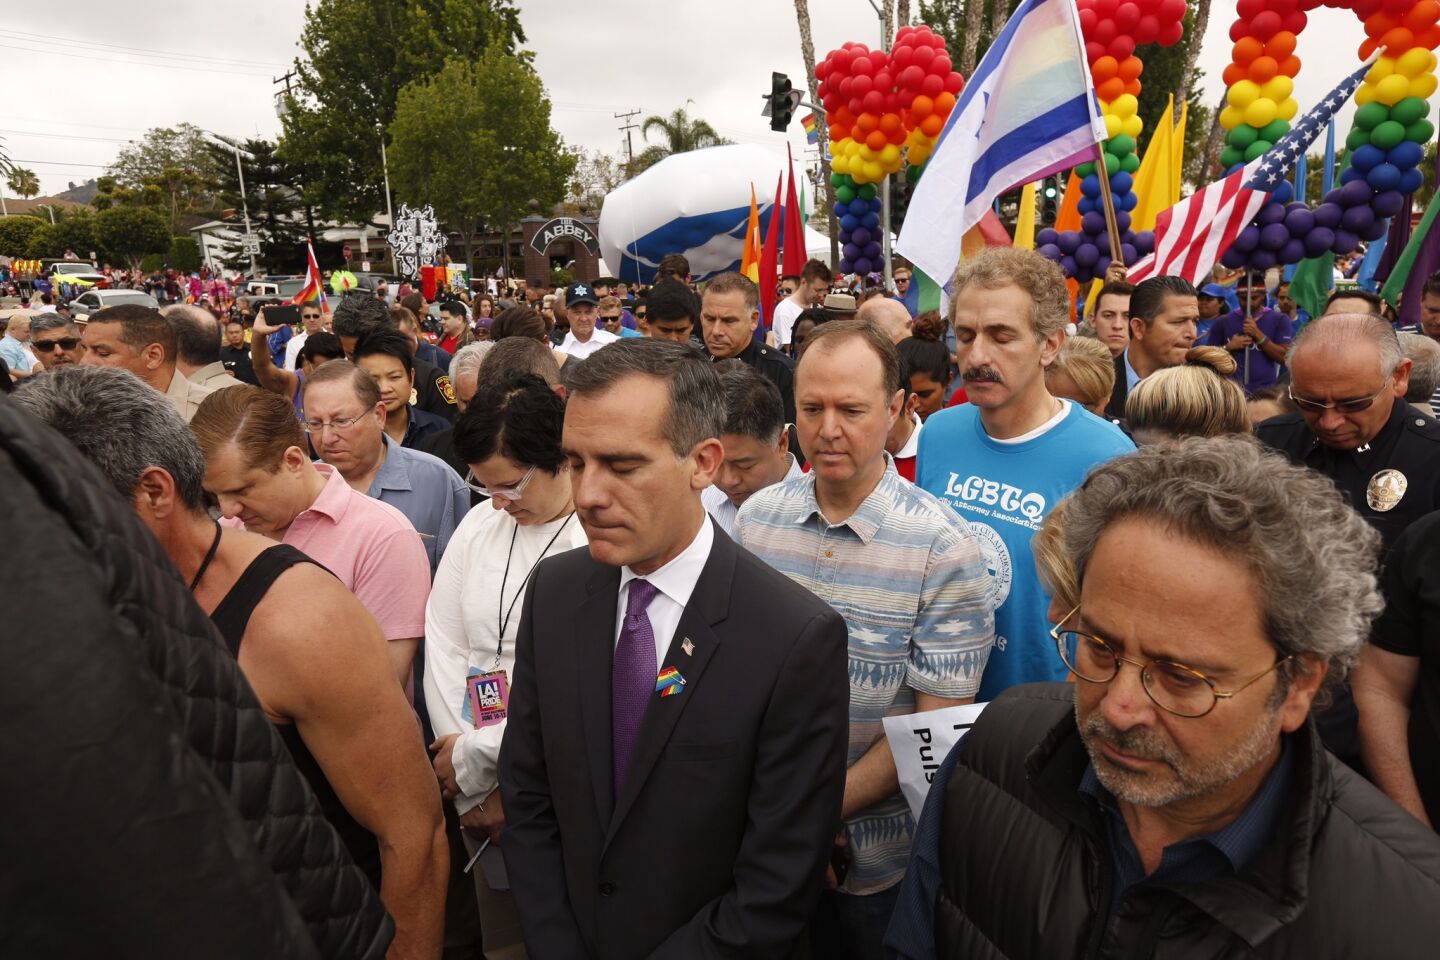 Los Angeles Mayor Eric Garcetti, center, and others have a moment of silence on June 12, 2016, in West Hollywood for the victims of the shooting in Orlando, Fla., that happened early that morning.